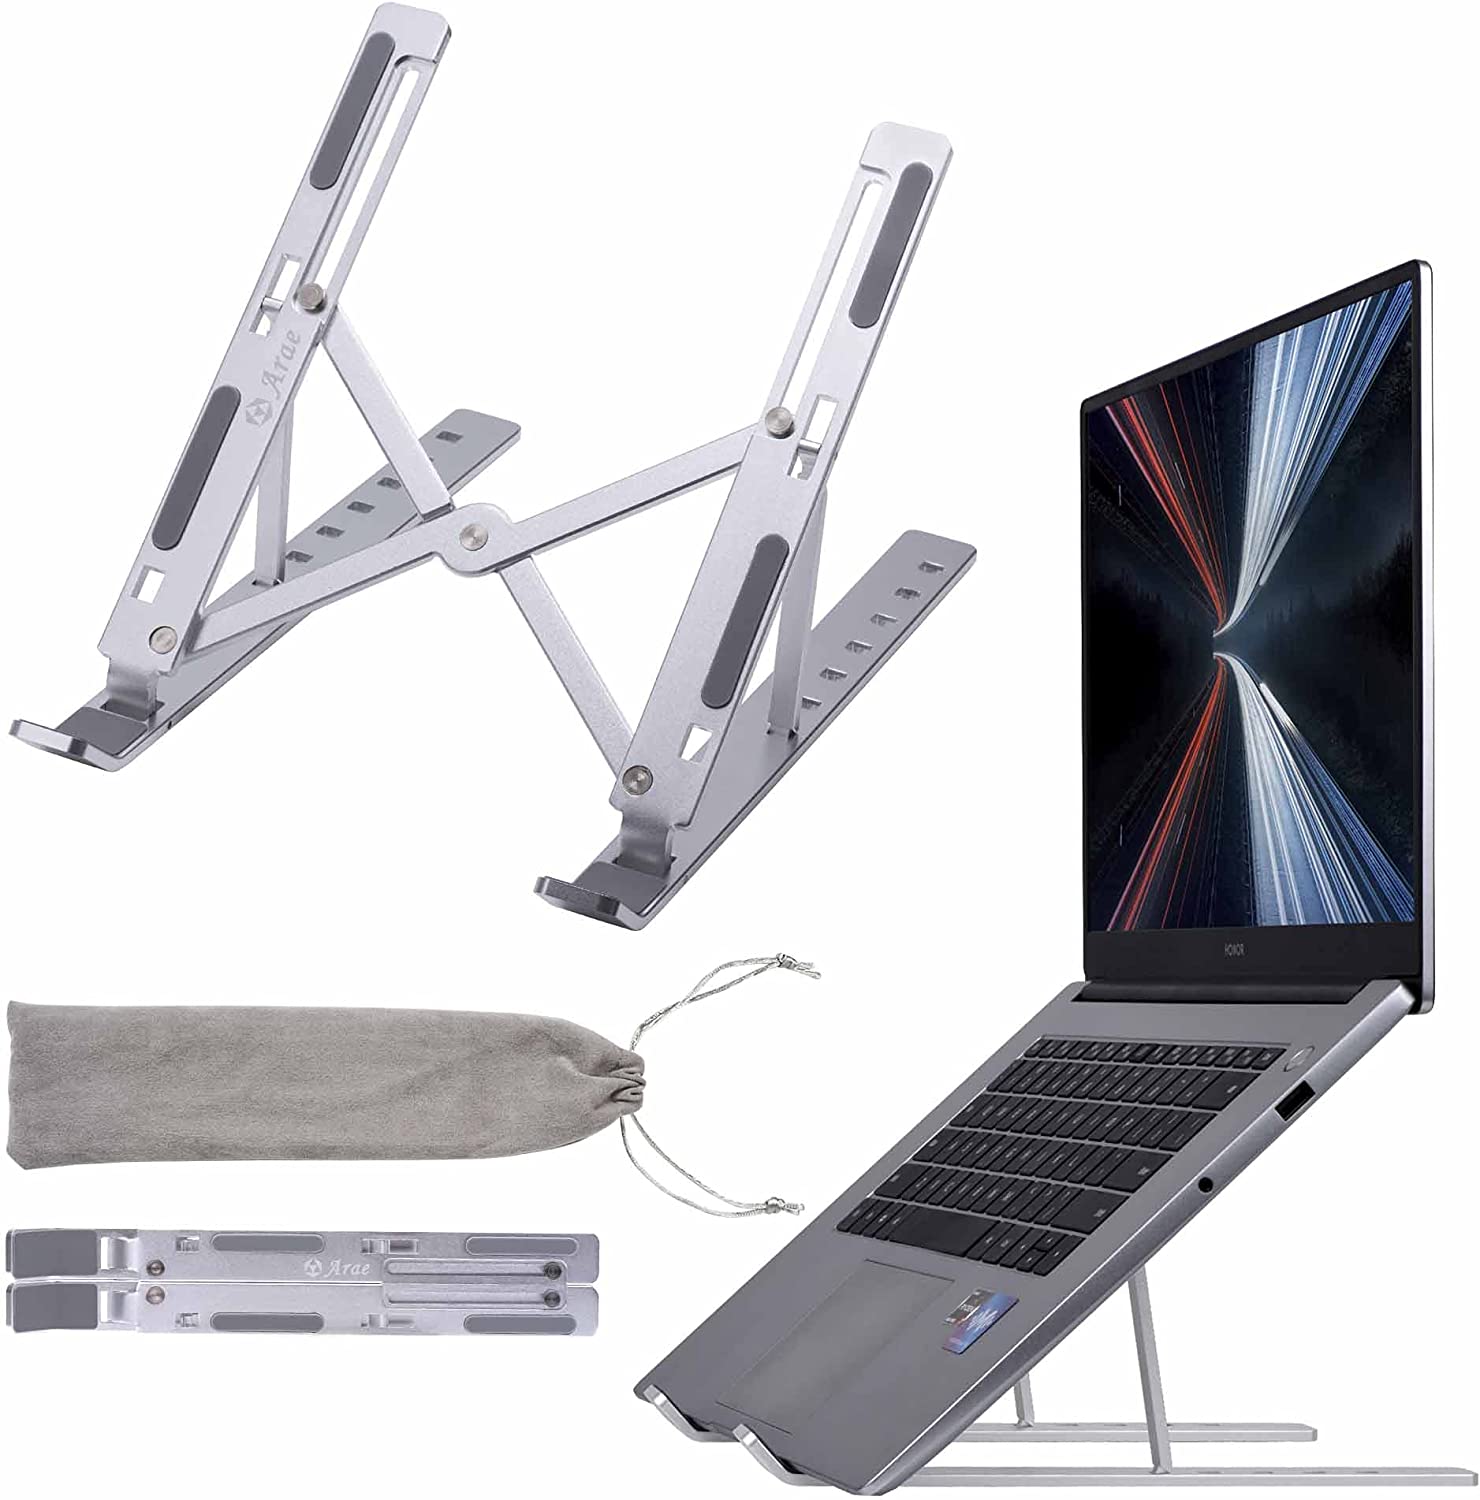 Arae Laptop Stand for Desk, Adjustable Ergonomic Portable Aluminum Laptop Holder, Foldable Computer Stand 7 Angles Anti-Slip Laptop Riser Compatible with 9-15.6 inch Laptops, Silver